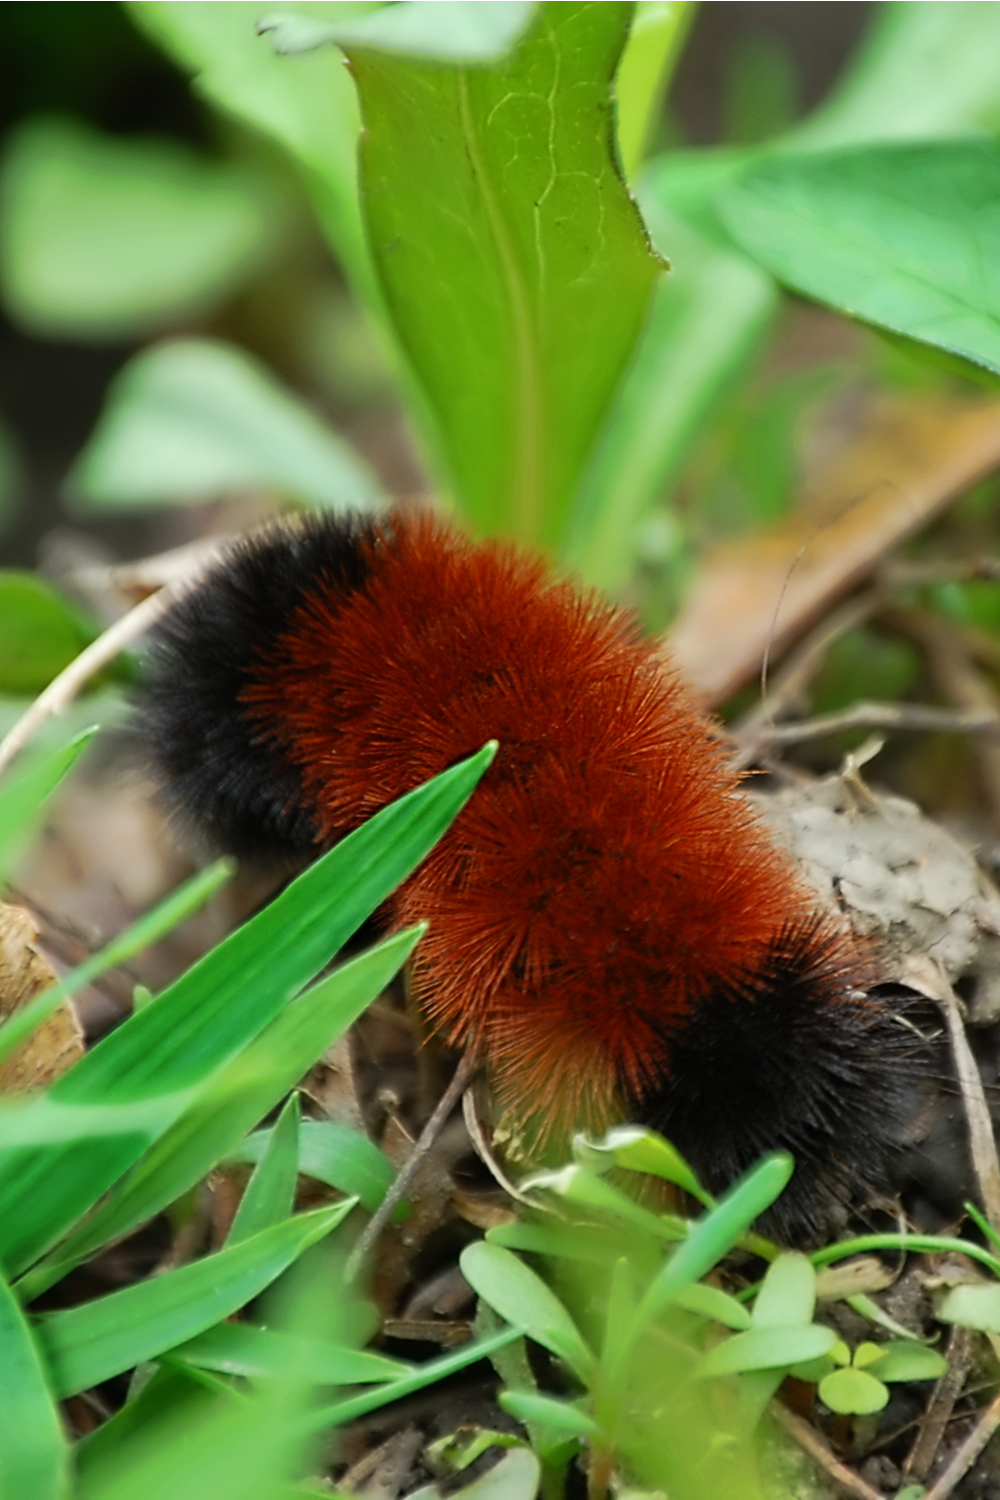 What Do Wooly Worms Eat in the Wild